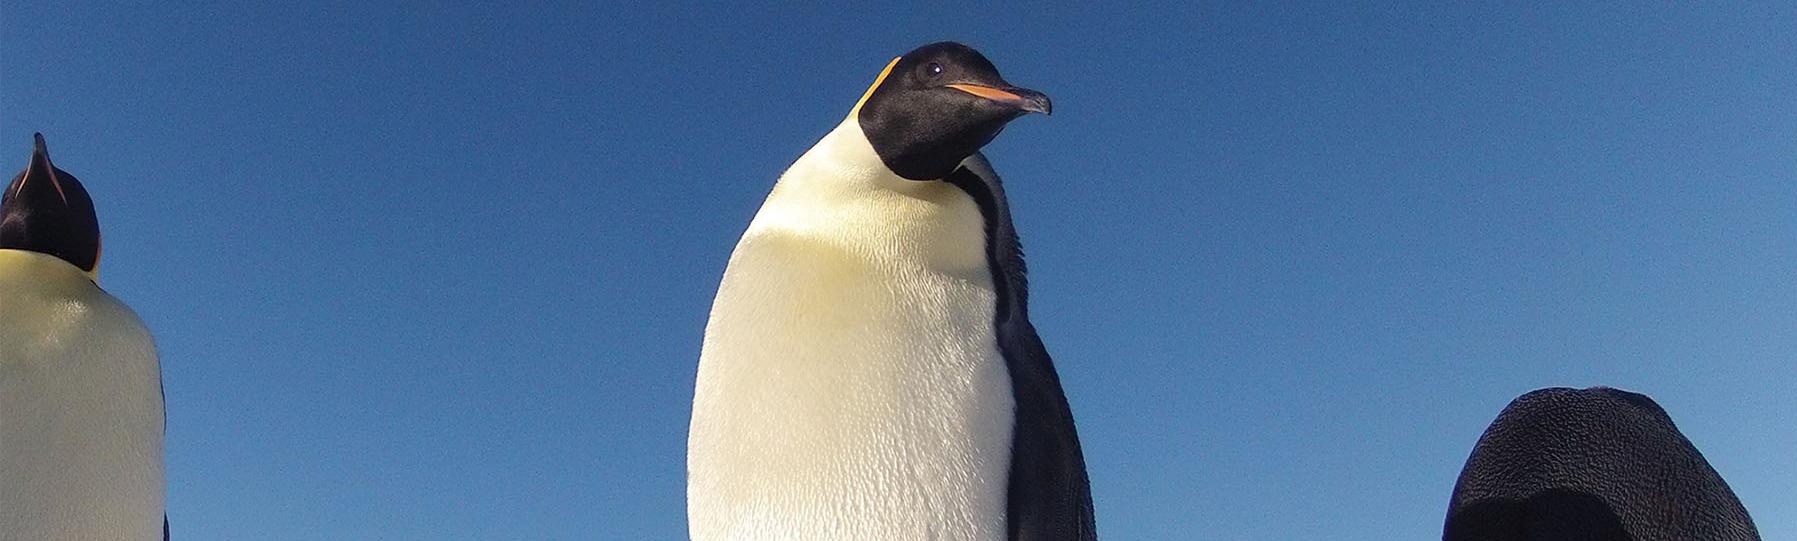 Large adult penguin stands against a blue sky with a fuzzy baby penguin in front of it.